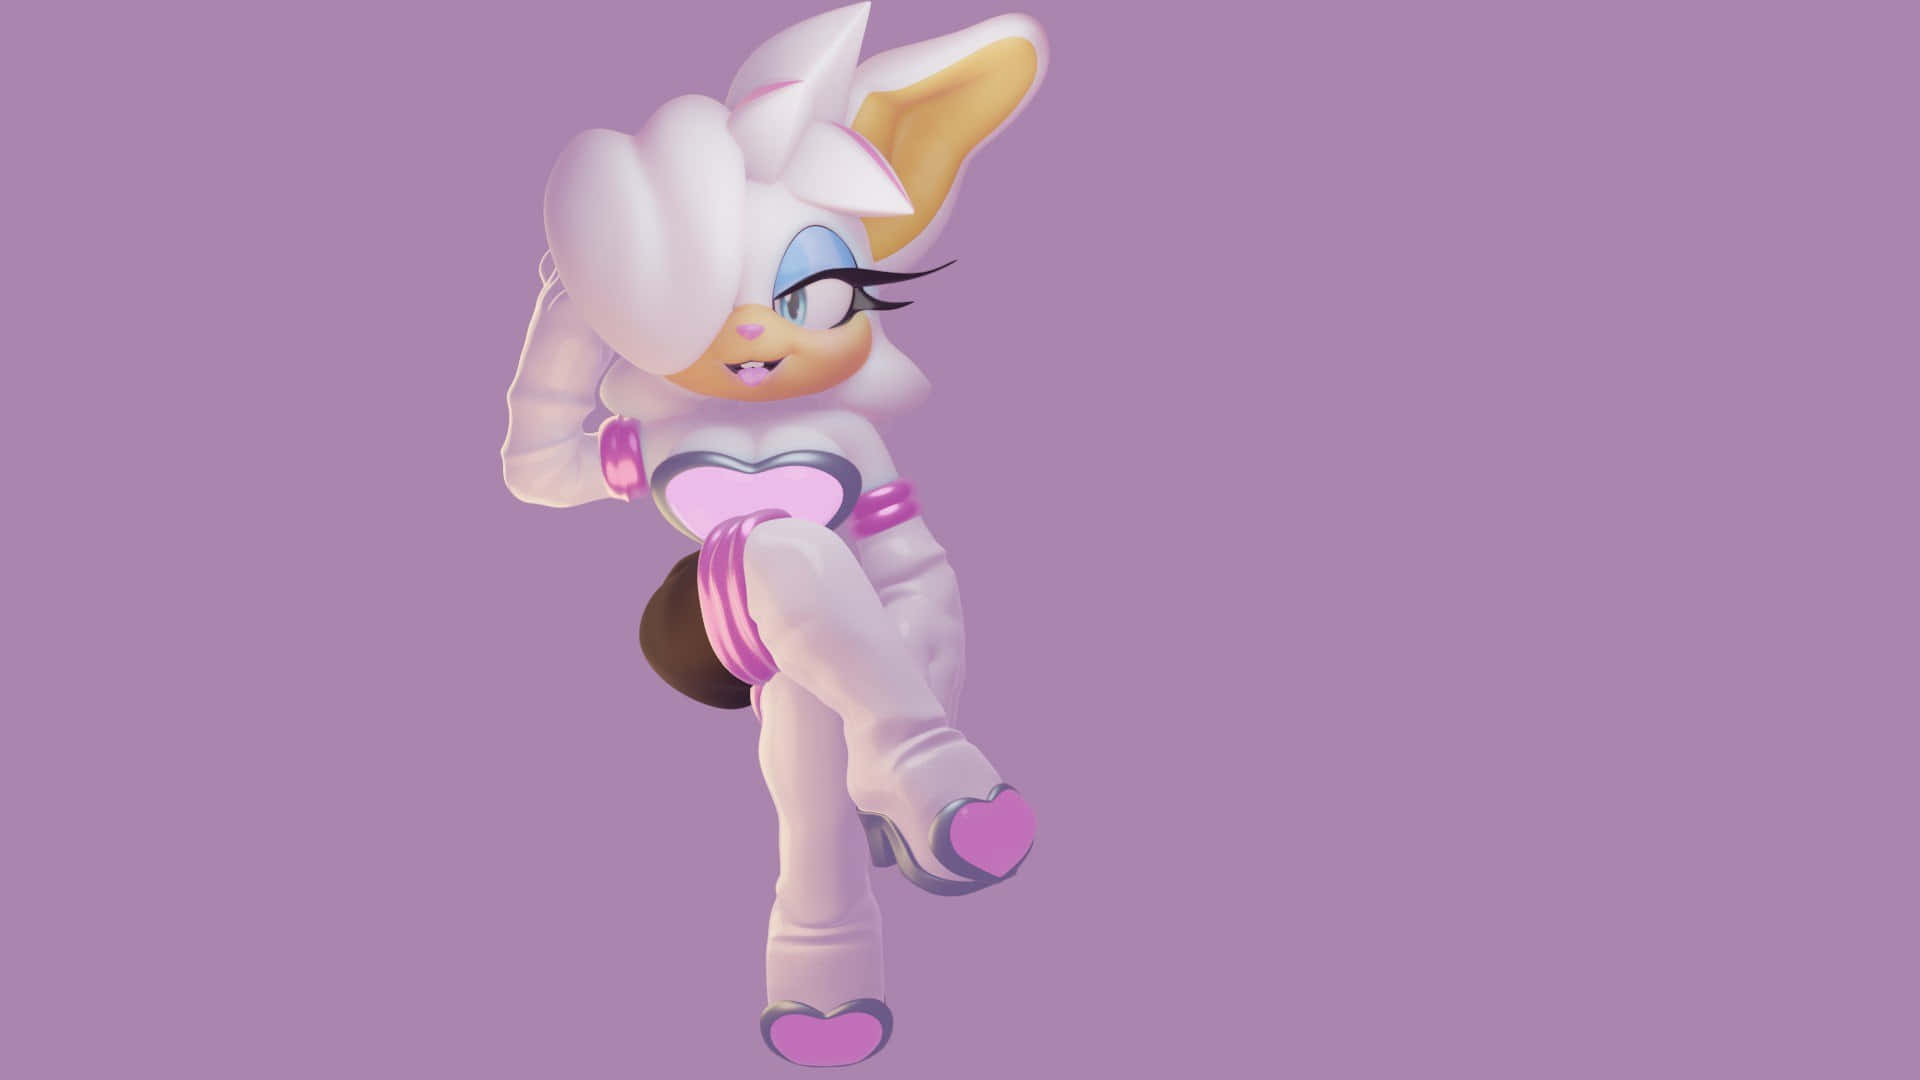 Rouge the Bat striking a confident pose in Sonic Universe Wallpaper